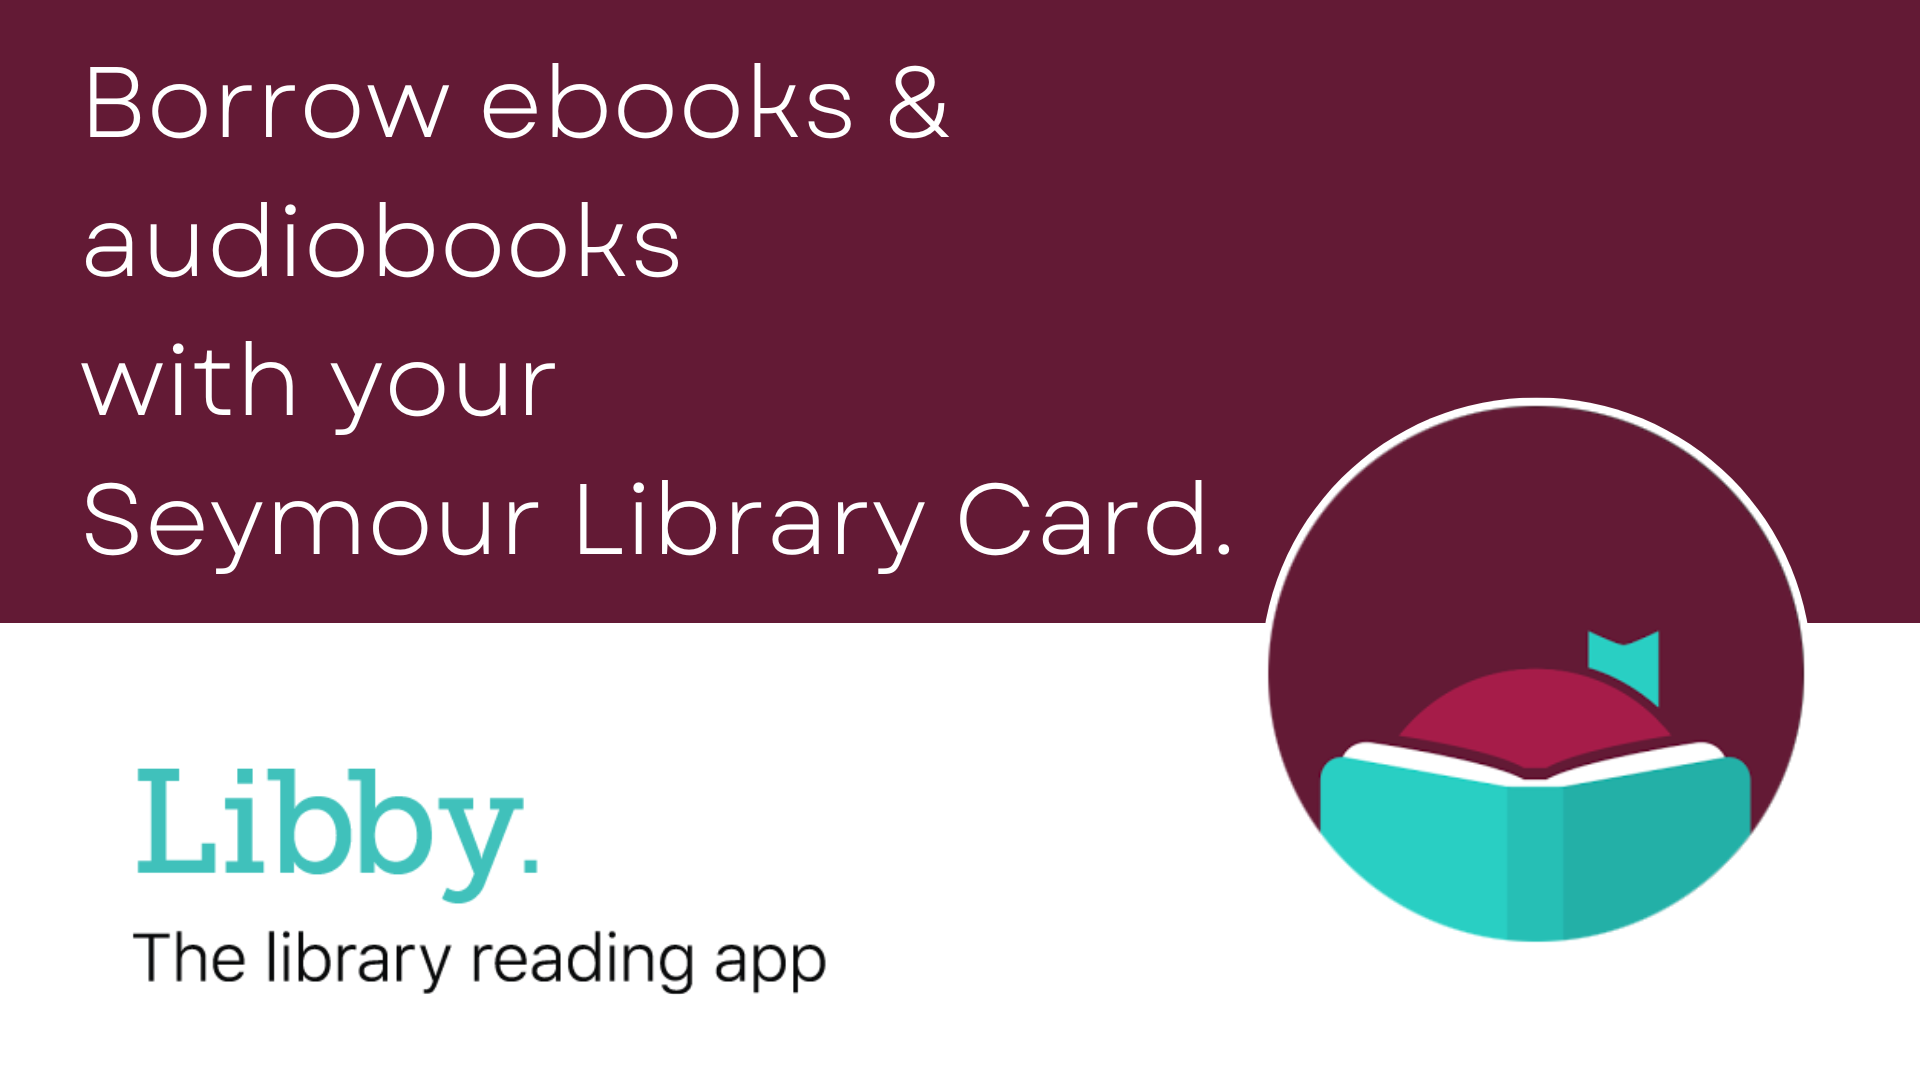 Libby the library reading app